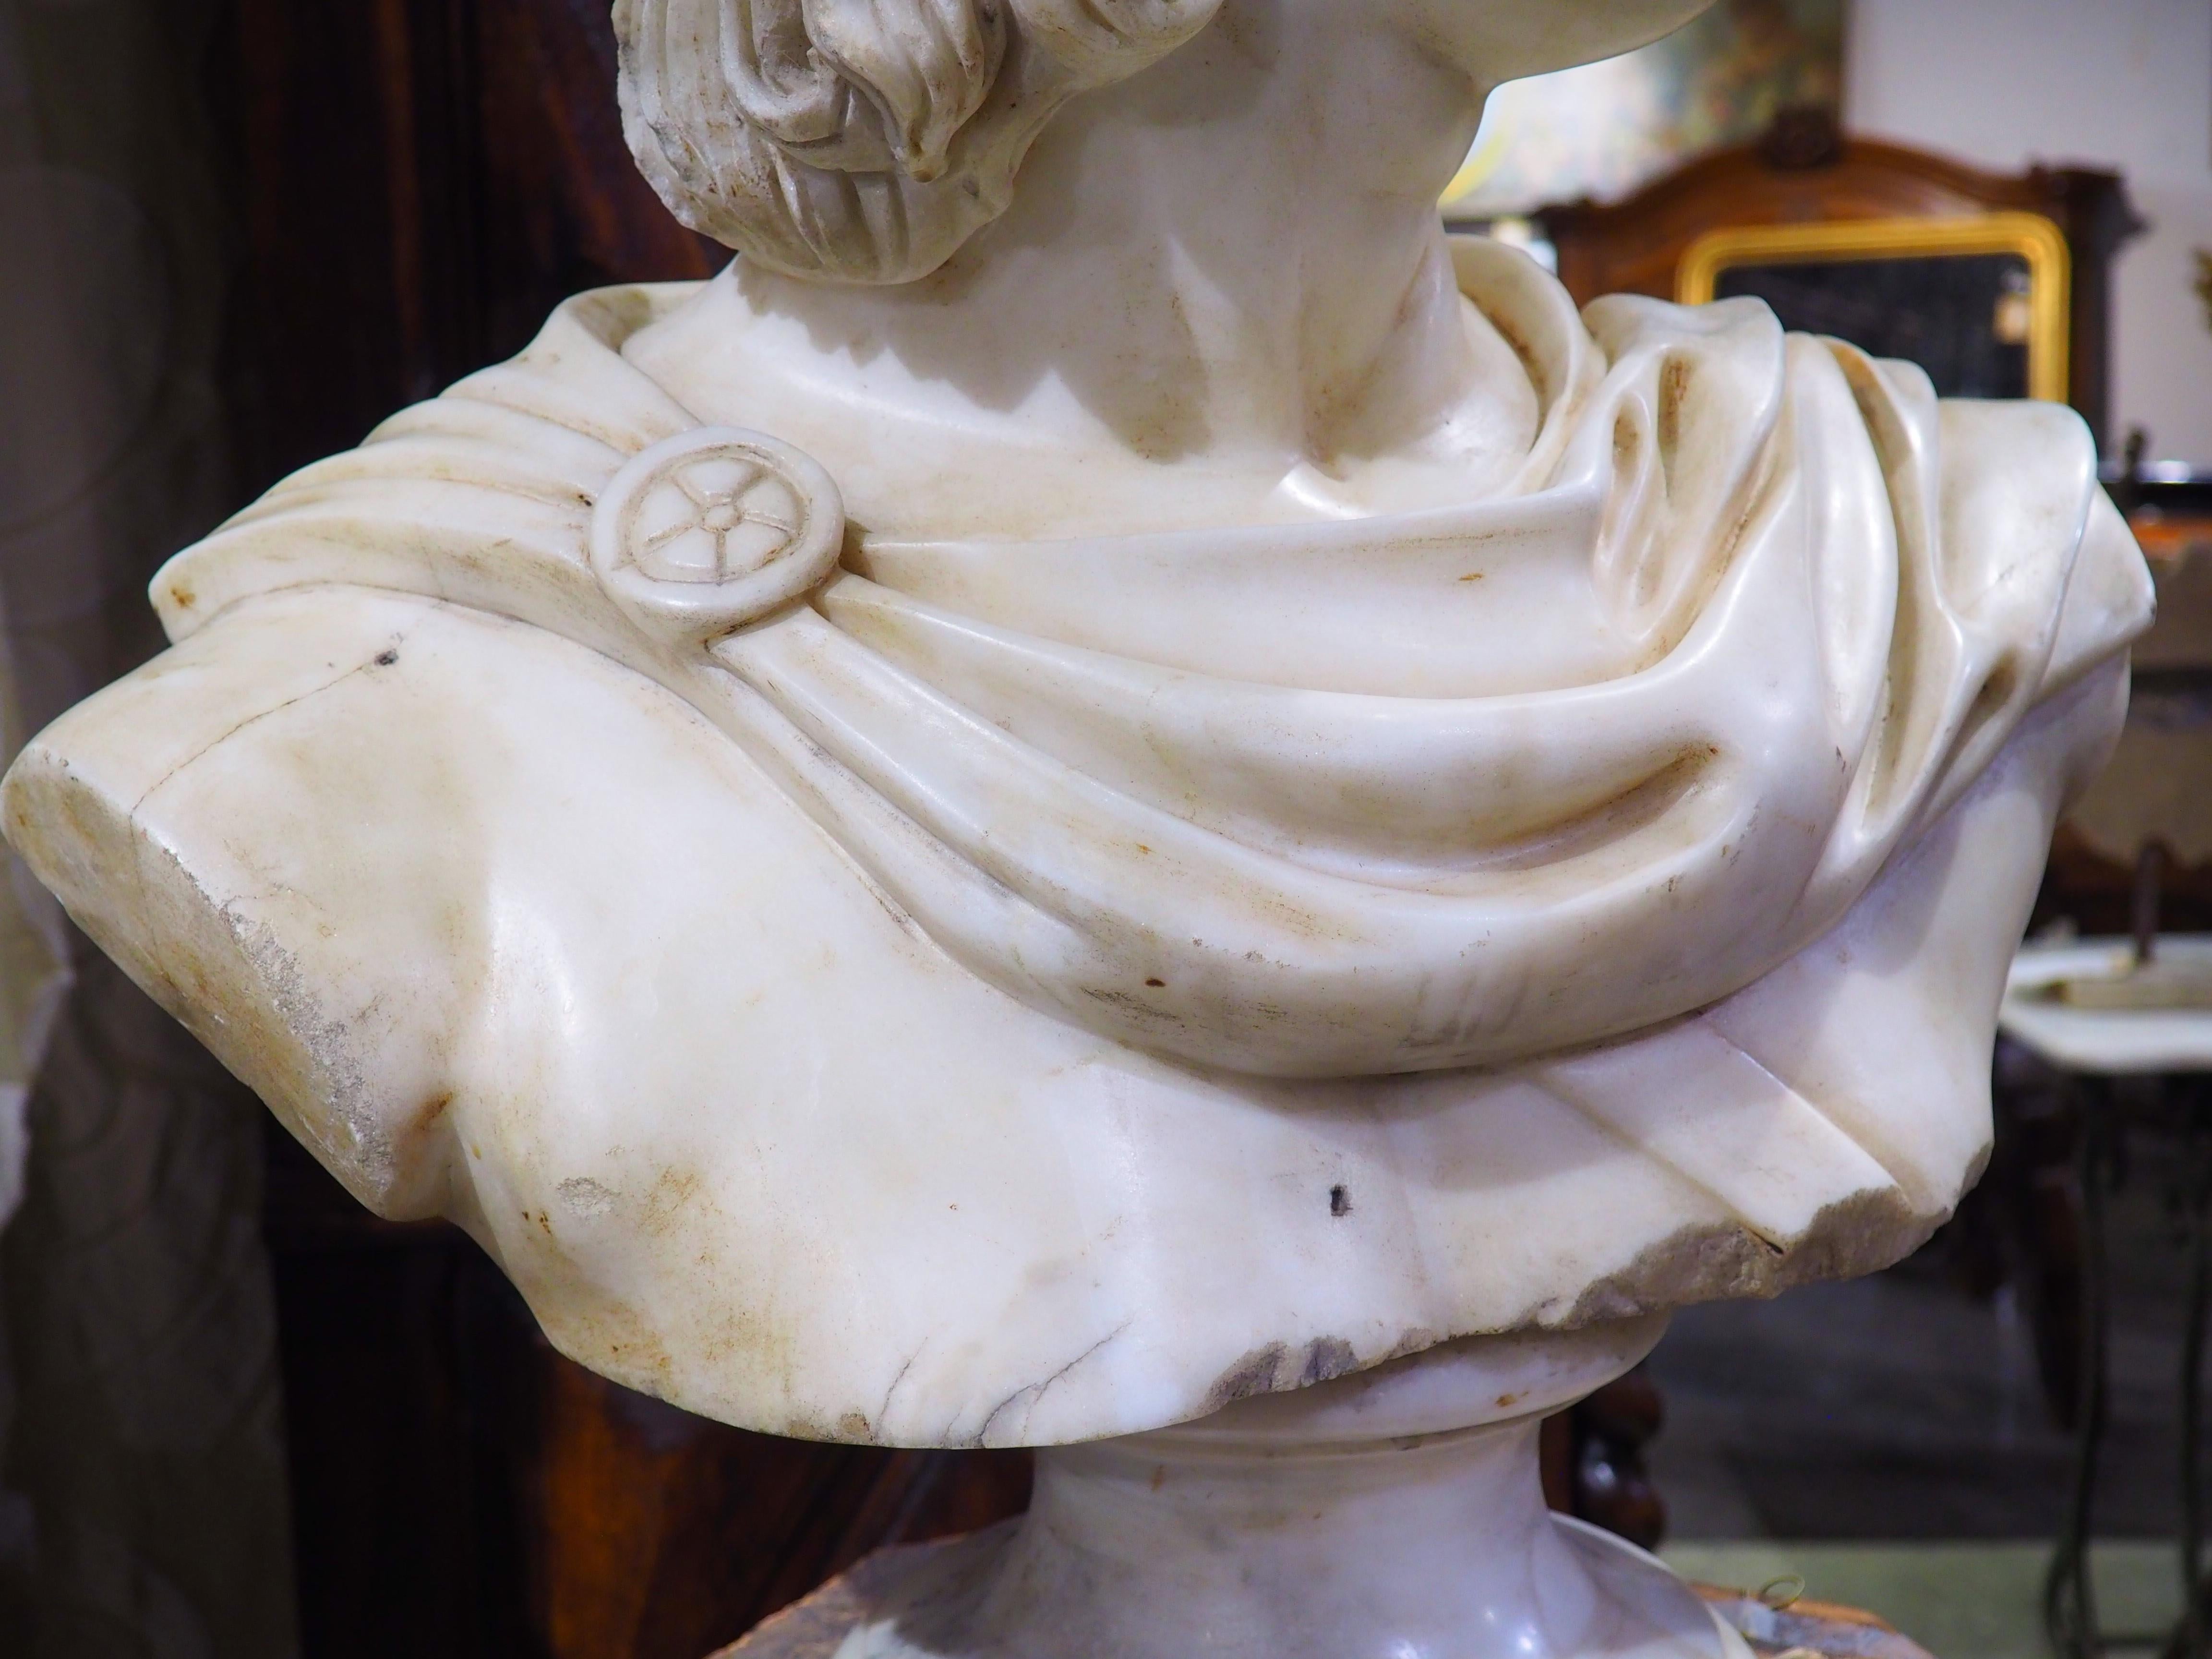 Antique Italian Carved Marble Bust of Apollo Belvedere, 19th Century 1